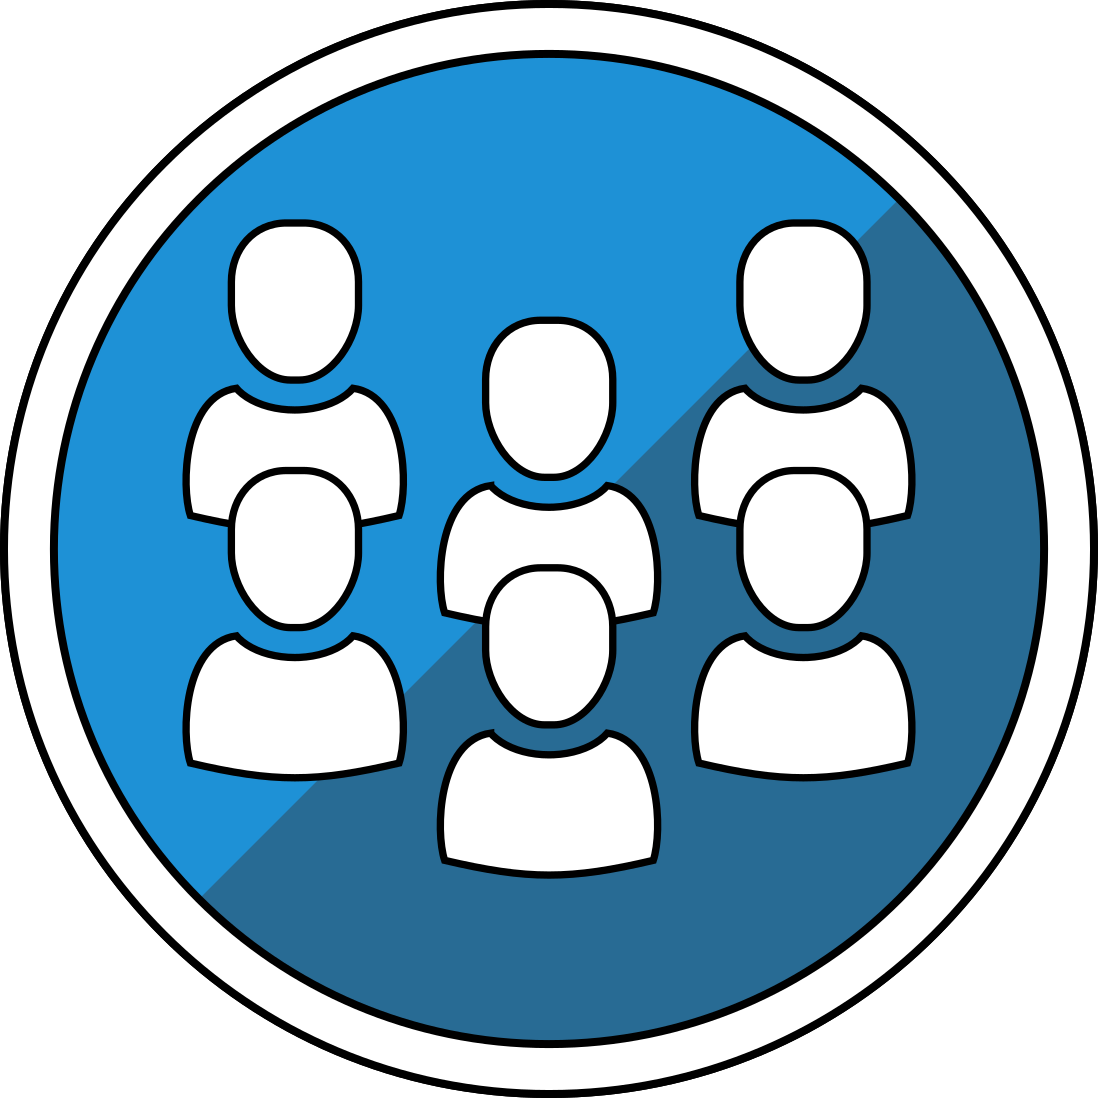 Theme 7 motif - a line drawing of six generic people arranged in two rows, within a blue-coloured circle.